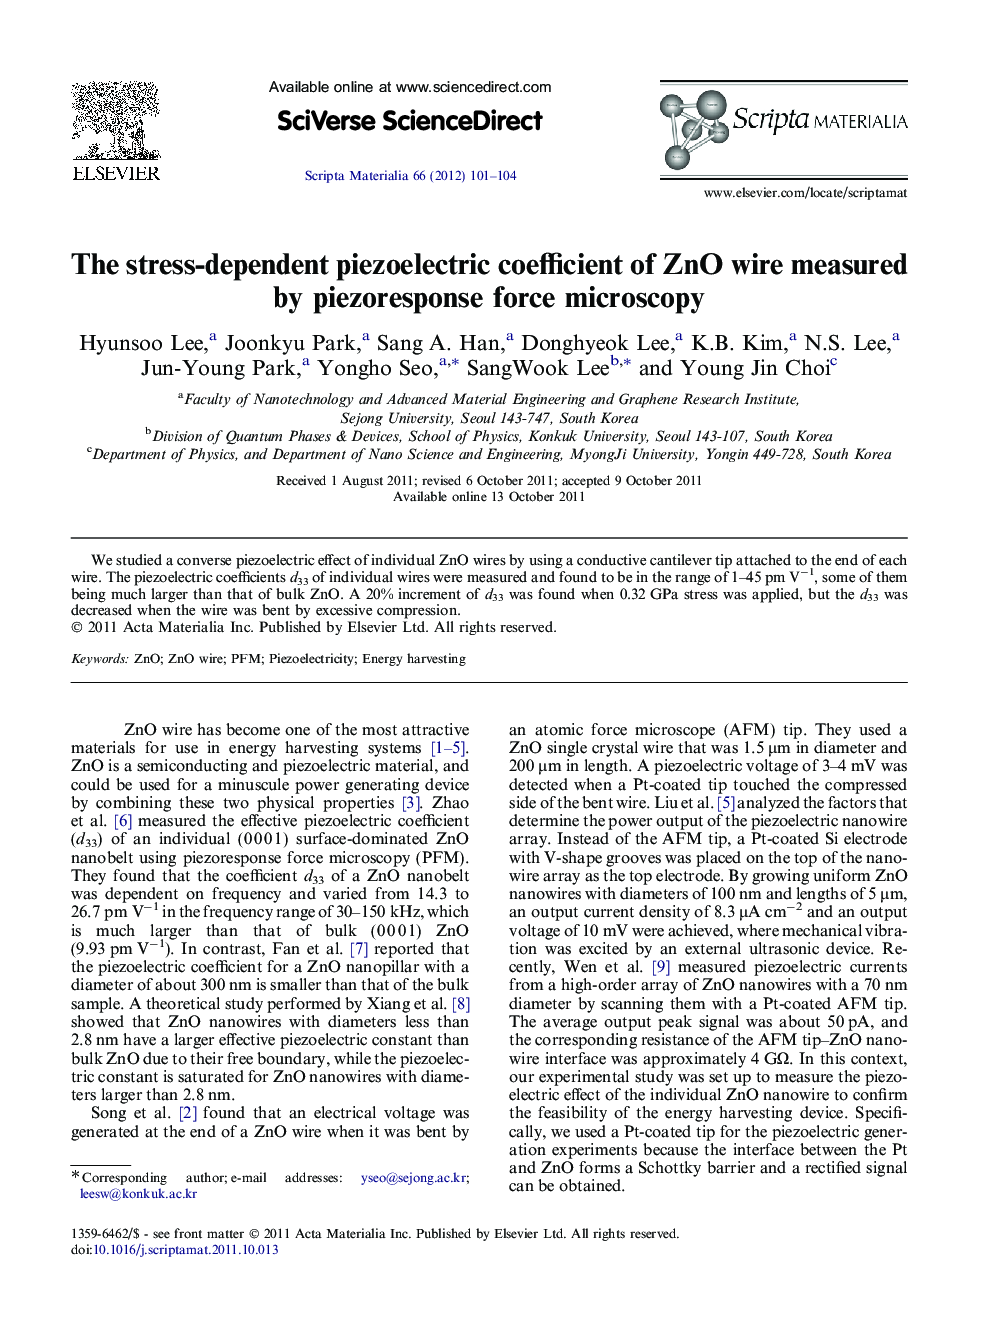 The stress-dependent piezoelectric coefficient of ZnO wire measured by piezoresponse force microscopy